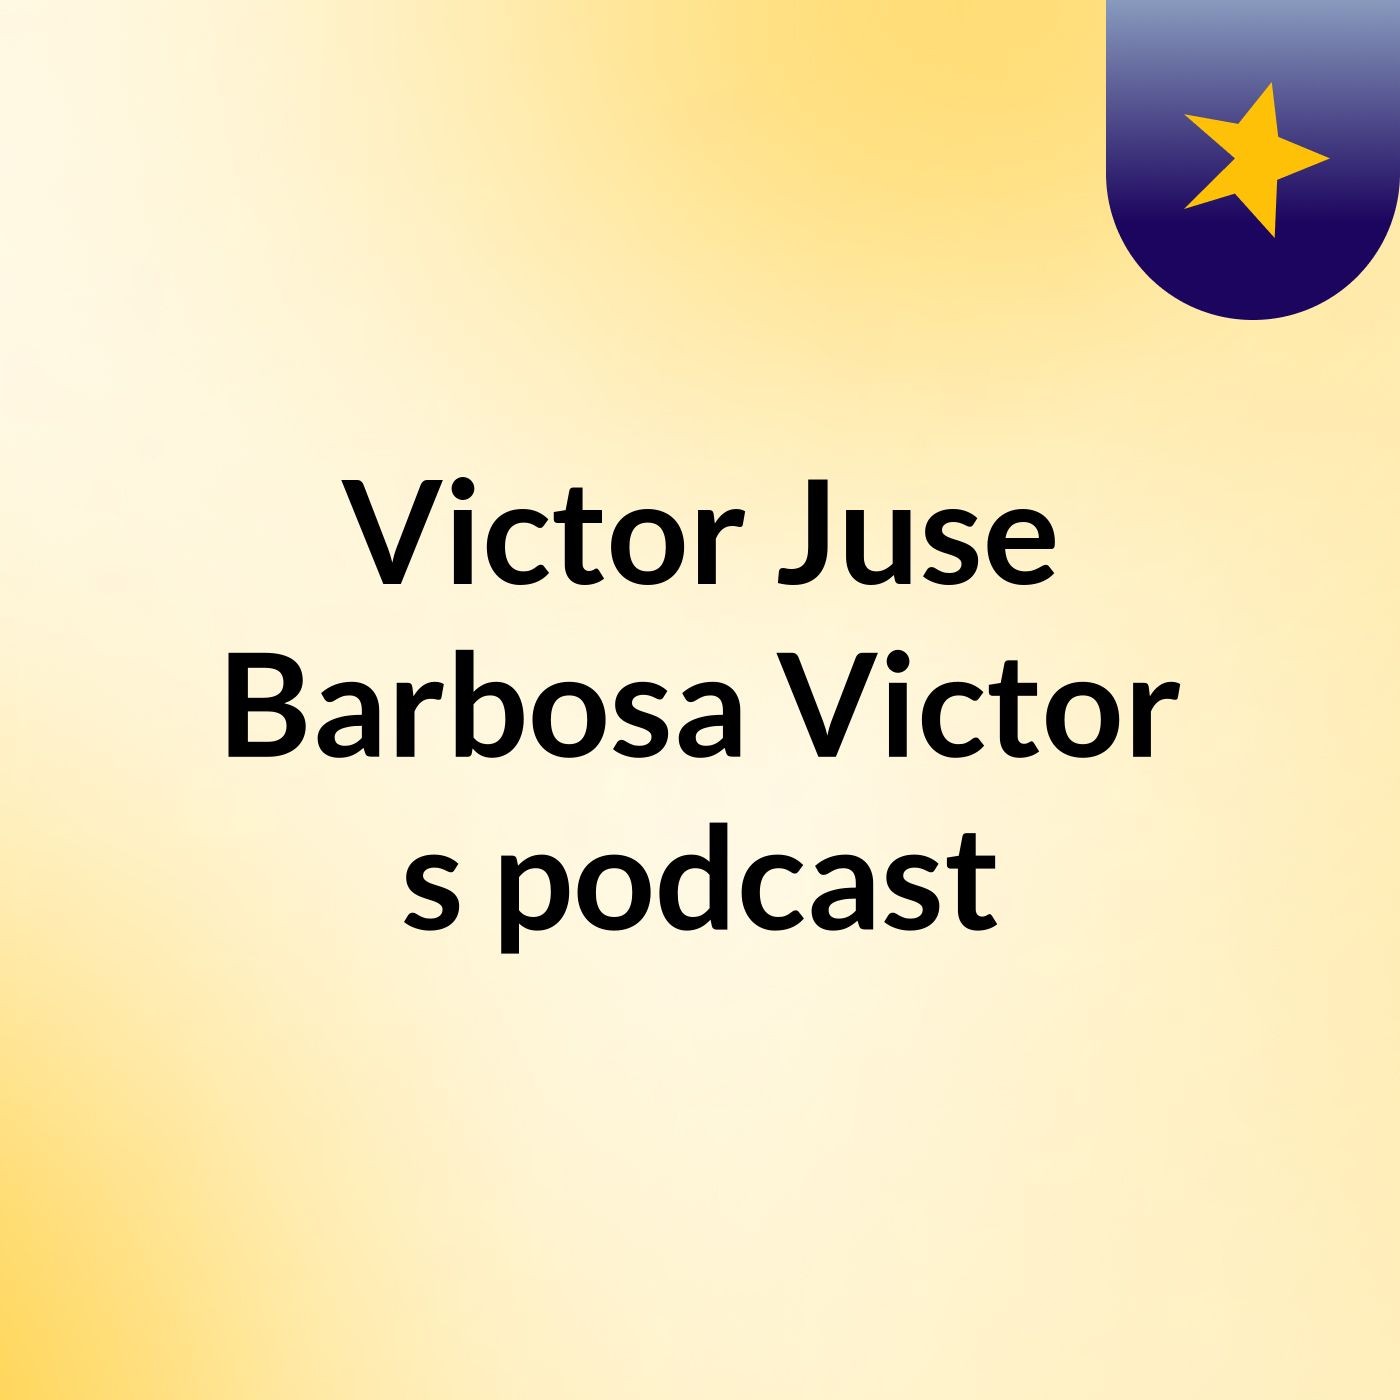 Victor Juse Barbosa Victor's podcast